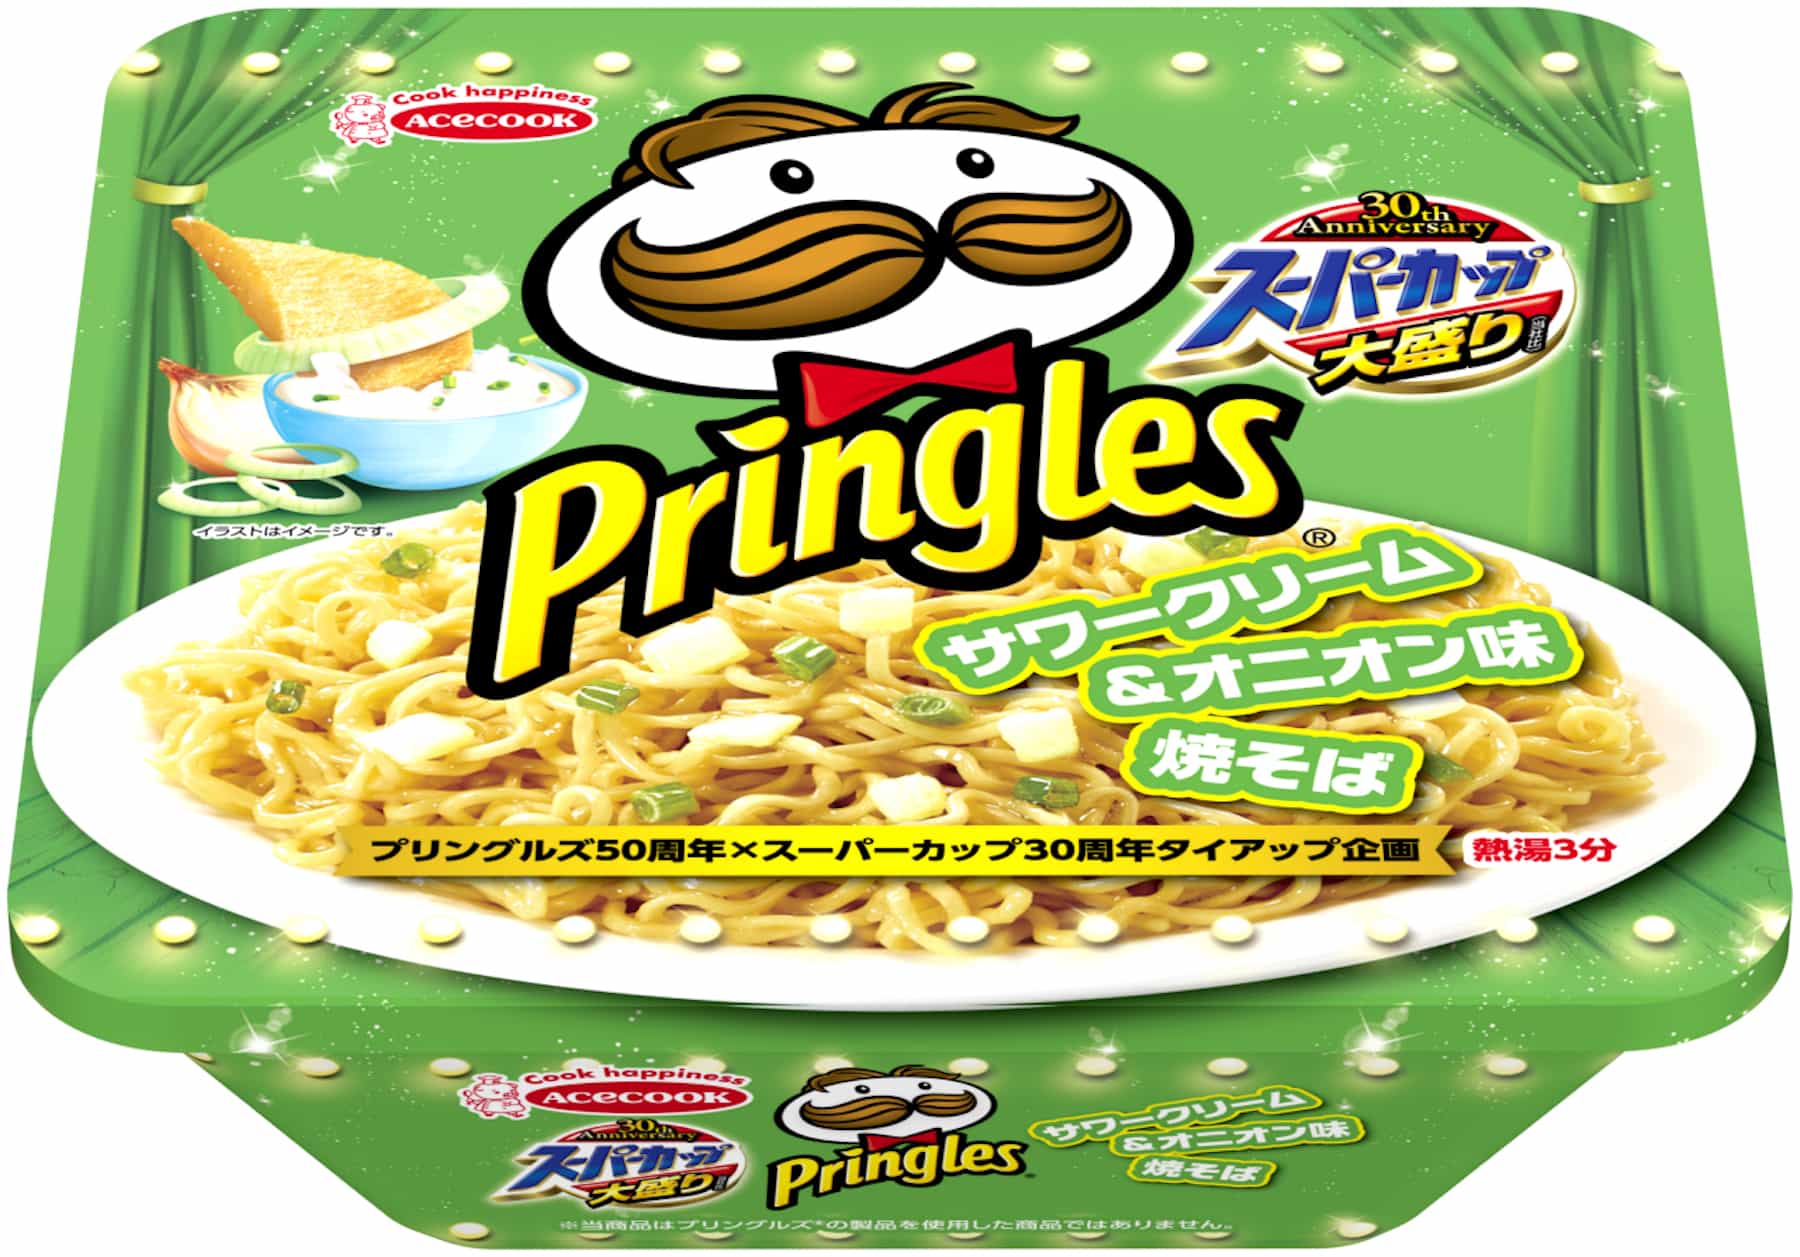 Pringles-Flavoured Instant Noodles Are Now Available In Japan! – SHOUT